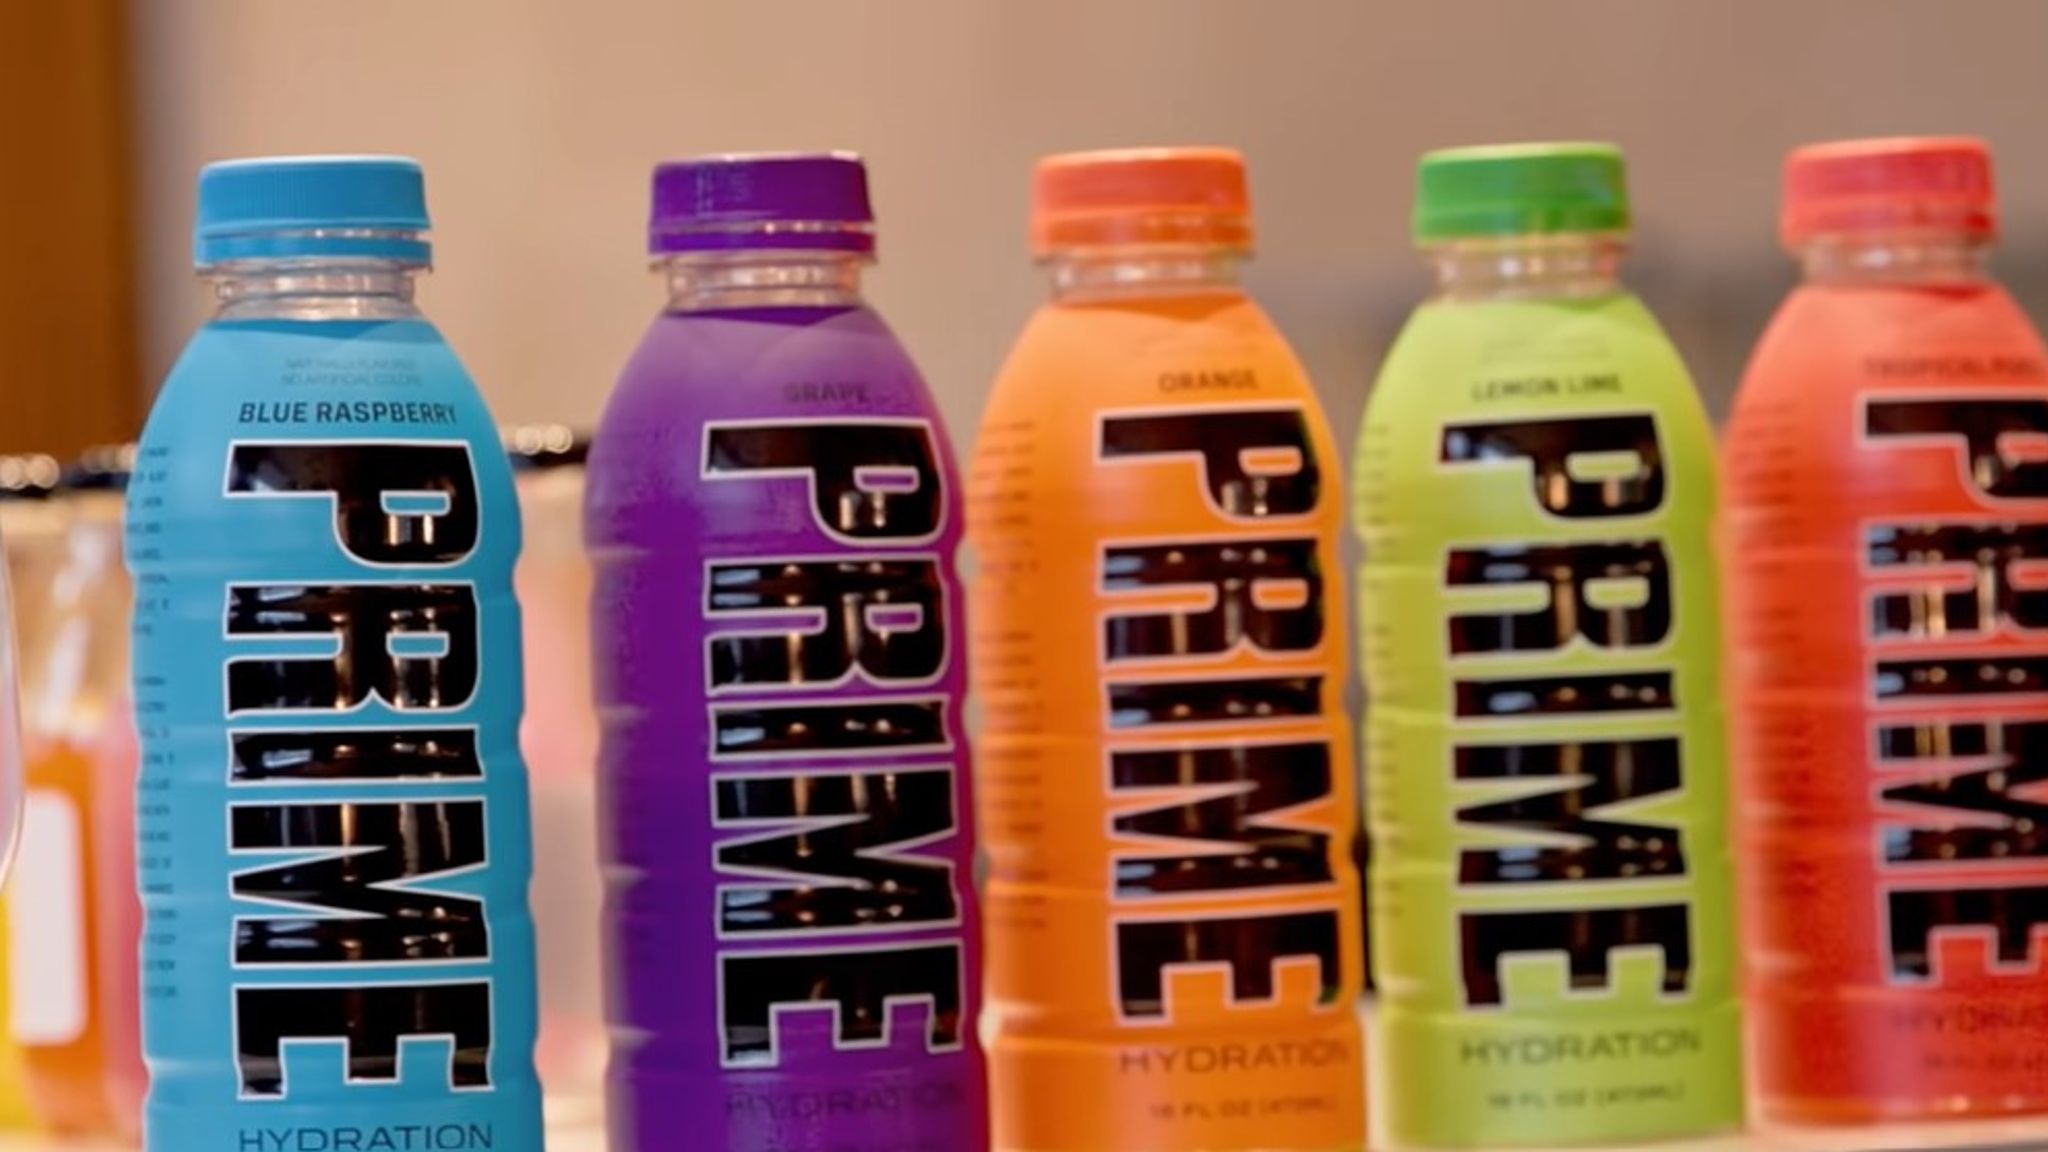 Logan Paul and KSI's sought after energy drink Prime is being sold